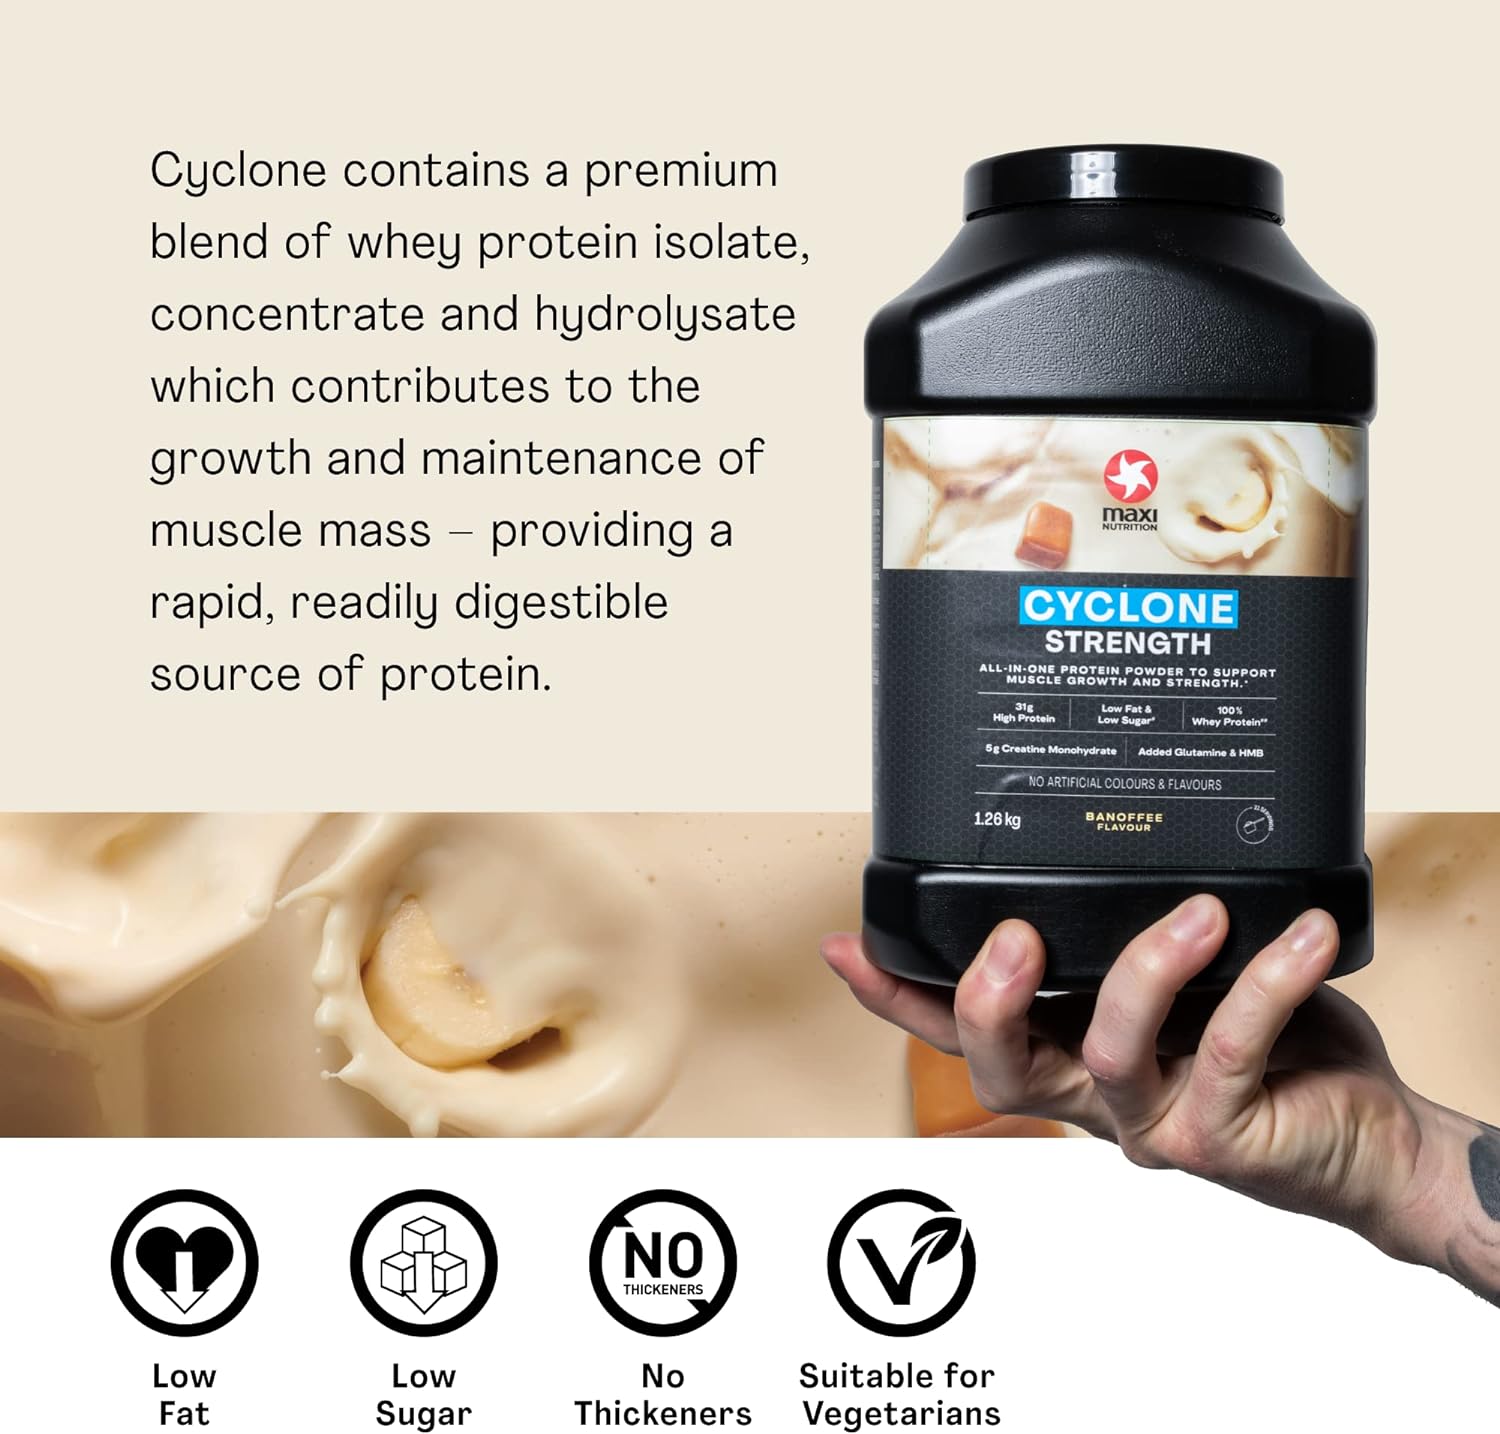 MaxiNutrition - Cyclone, Banoffee - Premium Whey Protein Powder with Added Creatine – Low in Sugar and Fat, Vegetarian-Friendly - 31g Protein, 204 kcal per Serving, 1.26kg